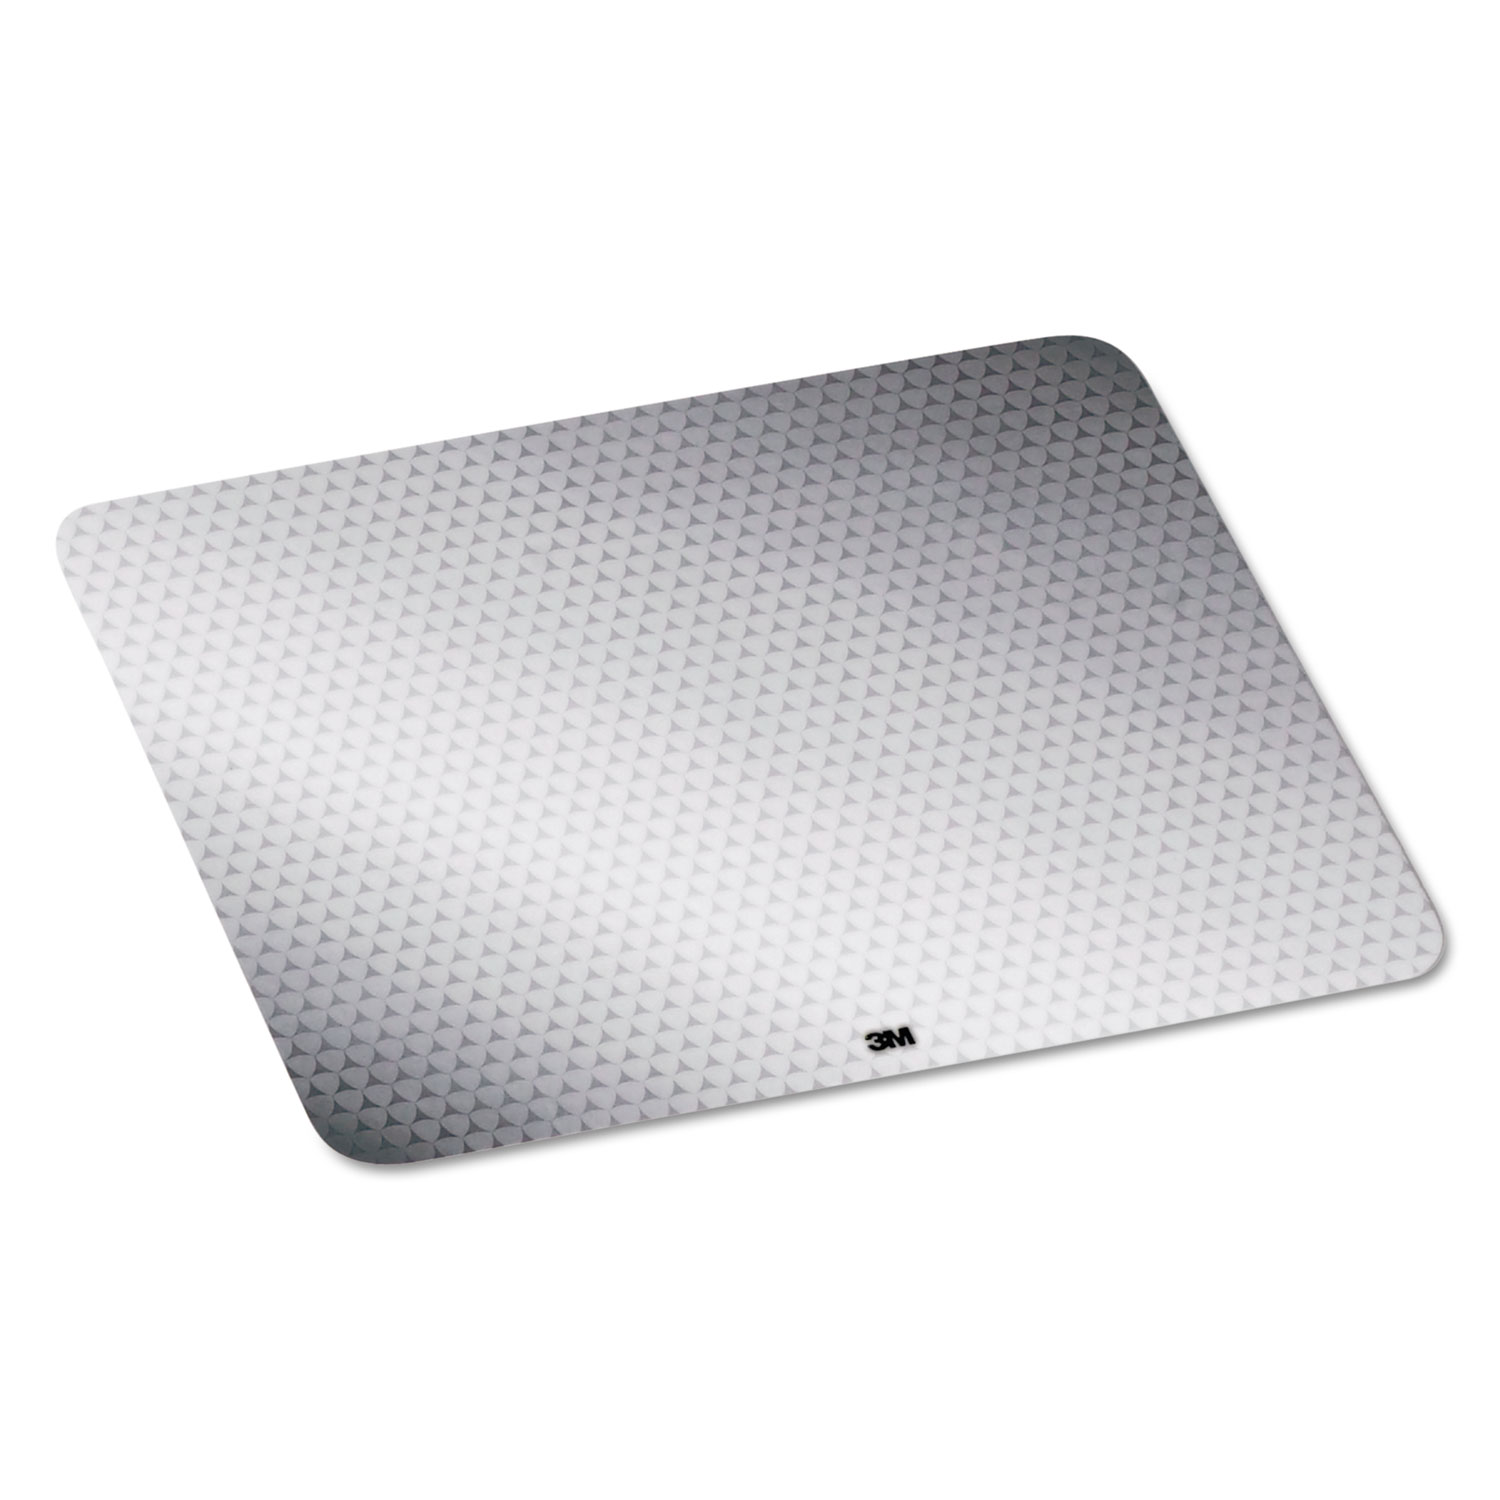  3M MP200PS2 Precise Mouse Pad, Nonskid Repositionable Adhesive Back, Gray Frostbyte (MMMMP200PS2) 